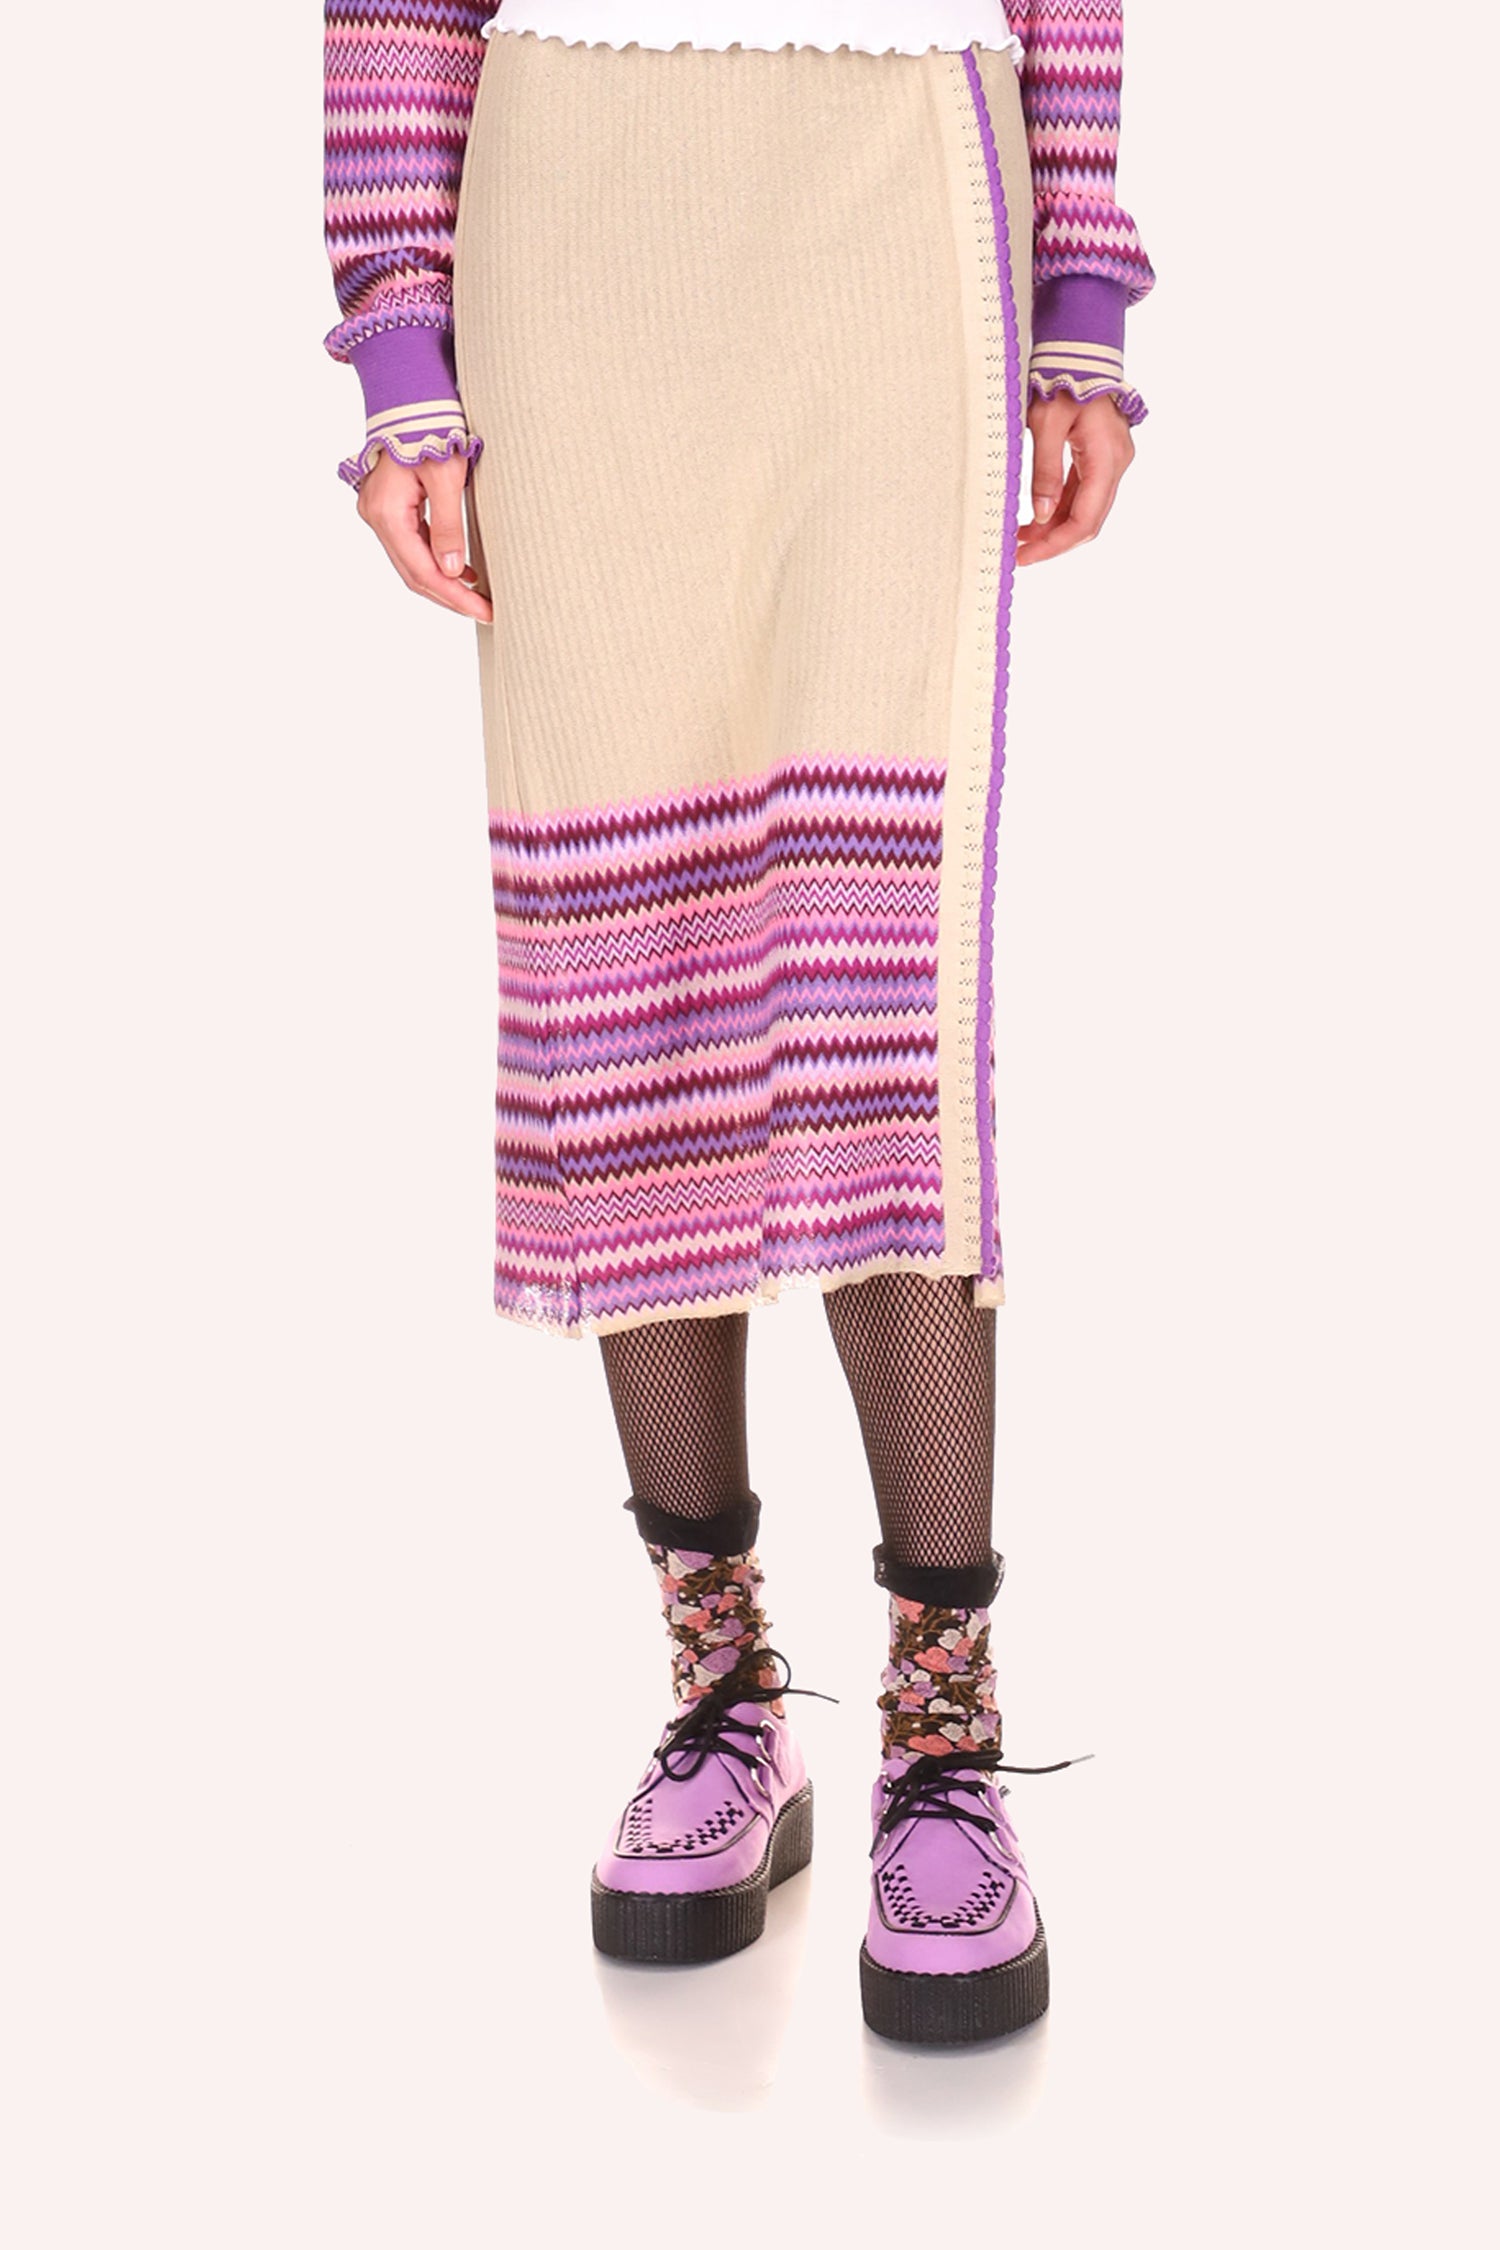 Mid-calf beige skirt, zigzag patterns, hue of lavender at the bottom, a slit that goes up to mid-thigh